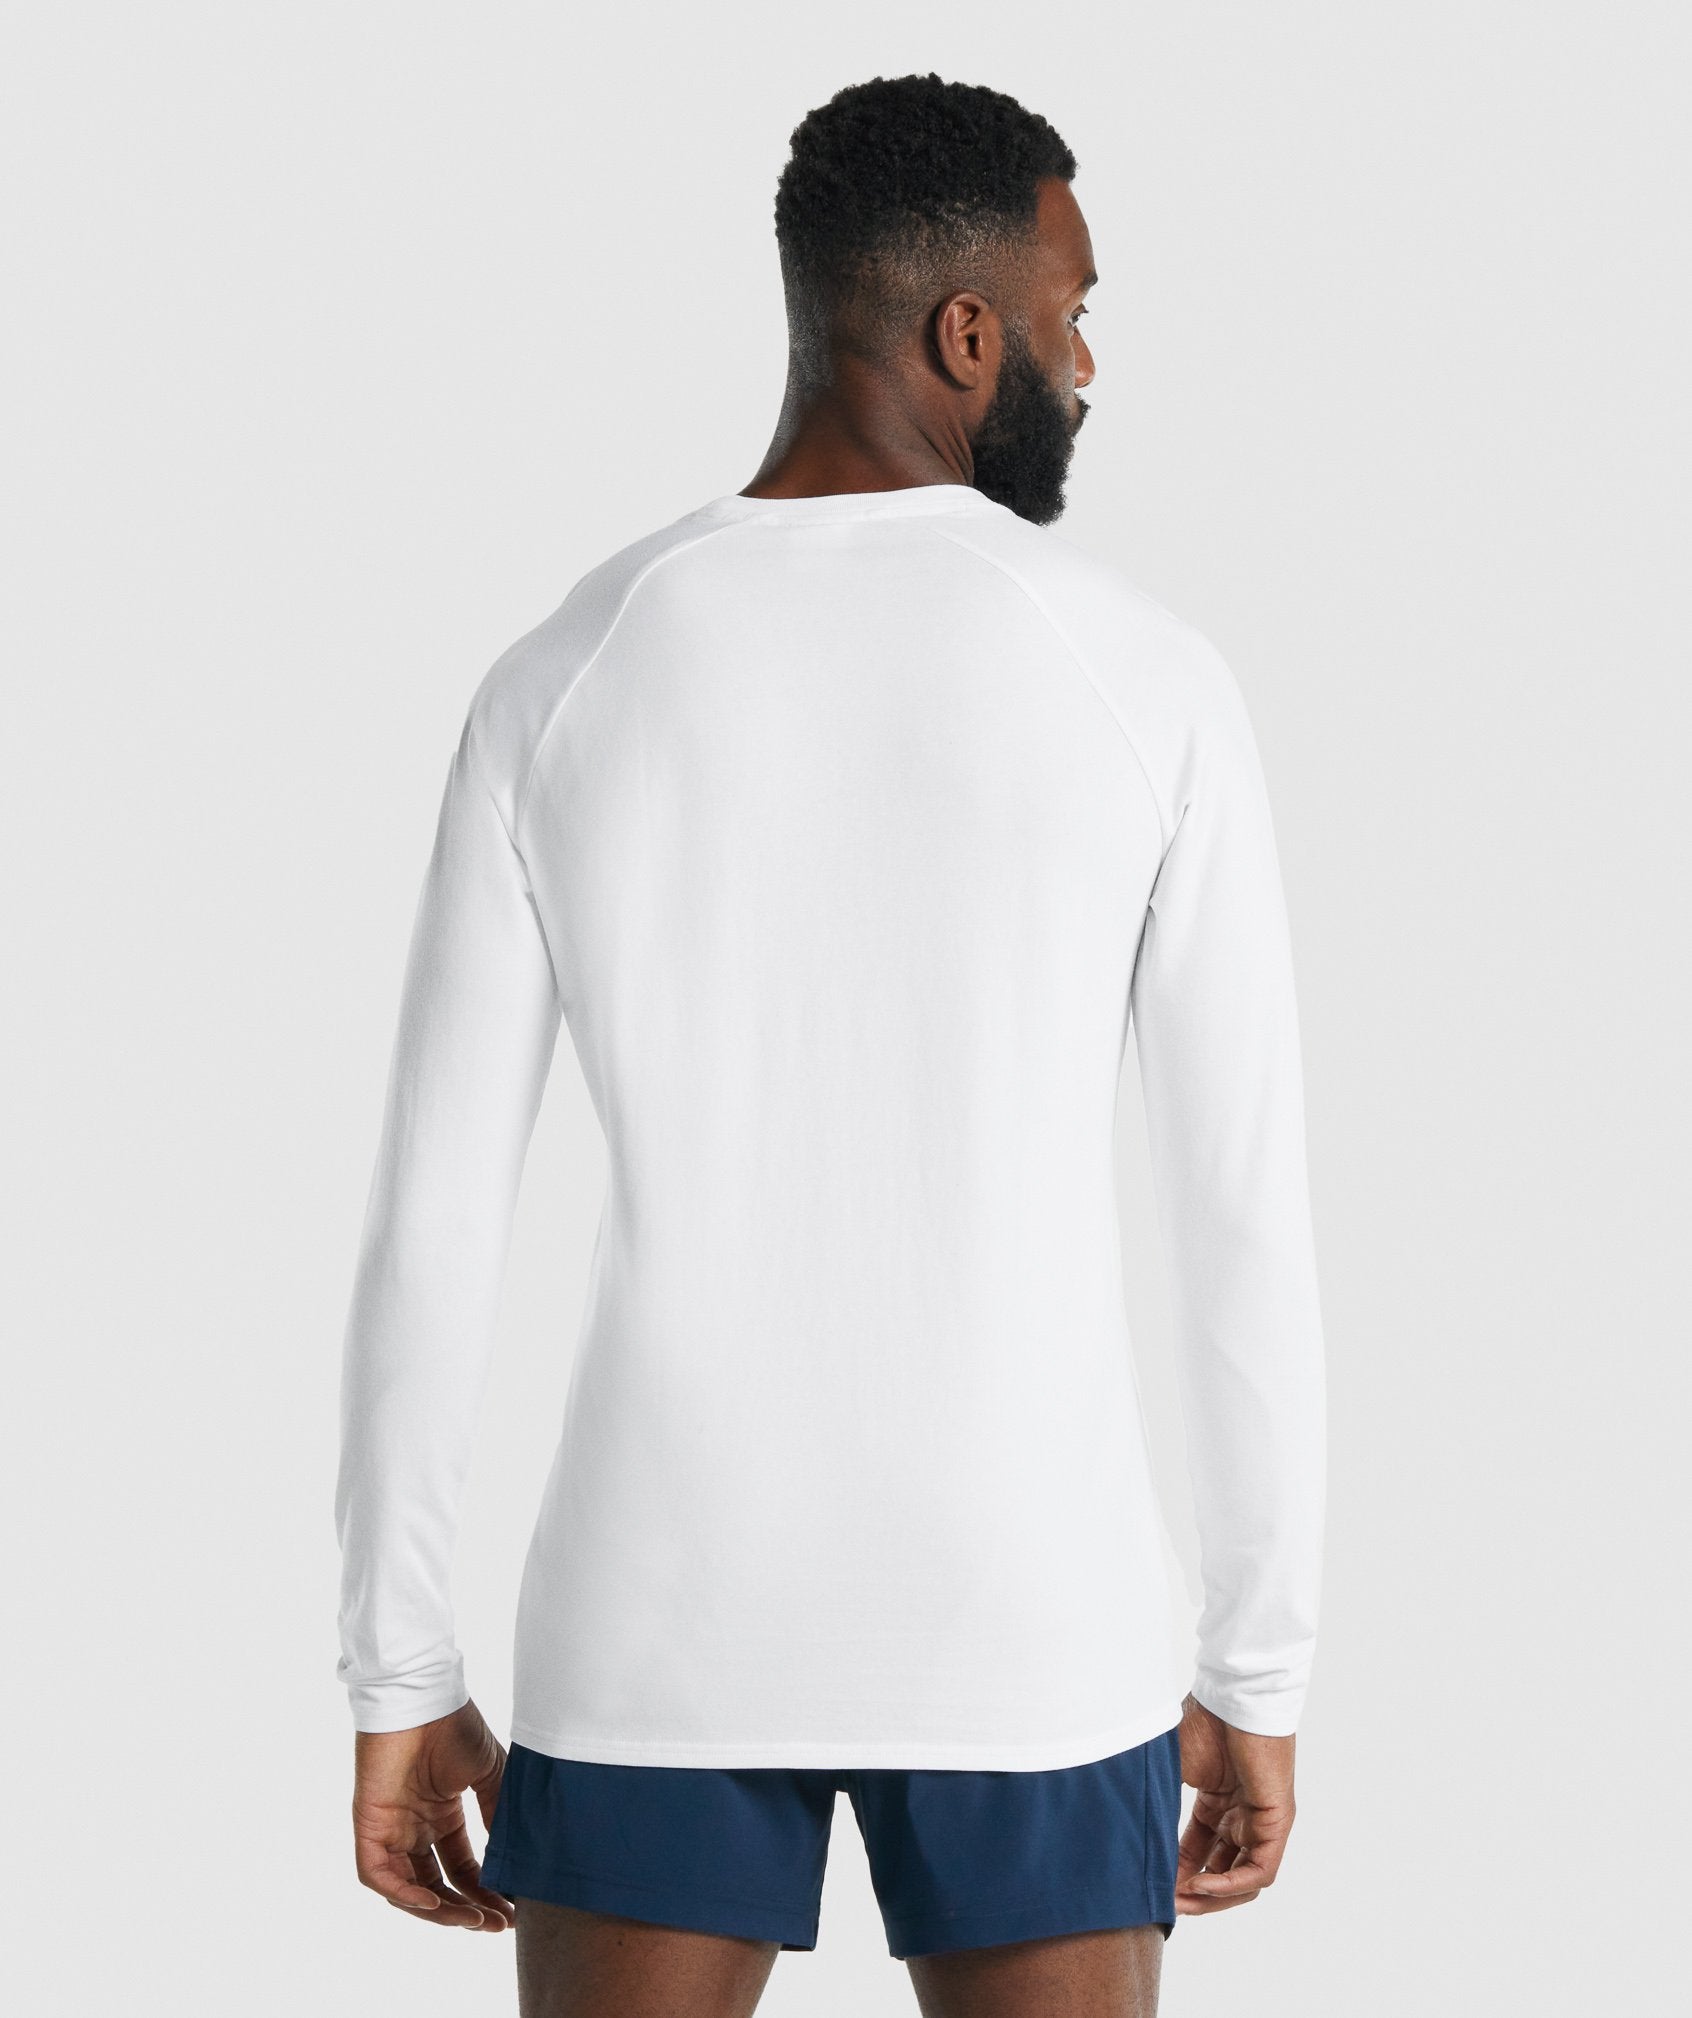 Apollo Long Sleeve T-Shirt in White - view 3